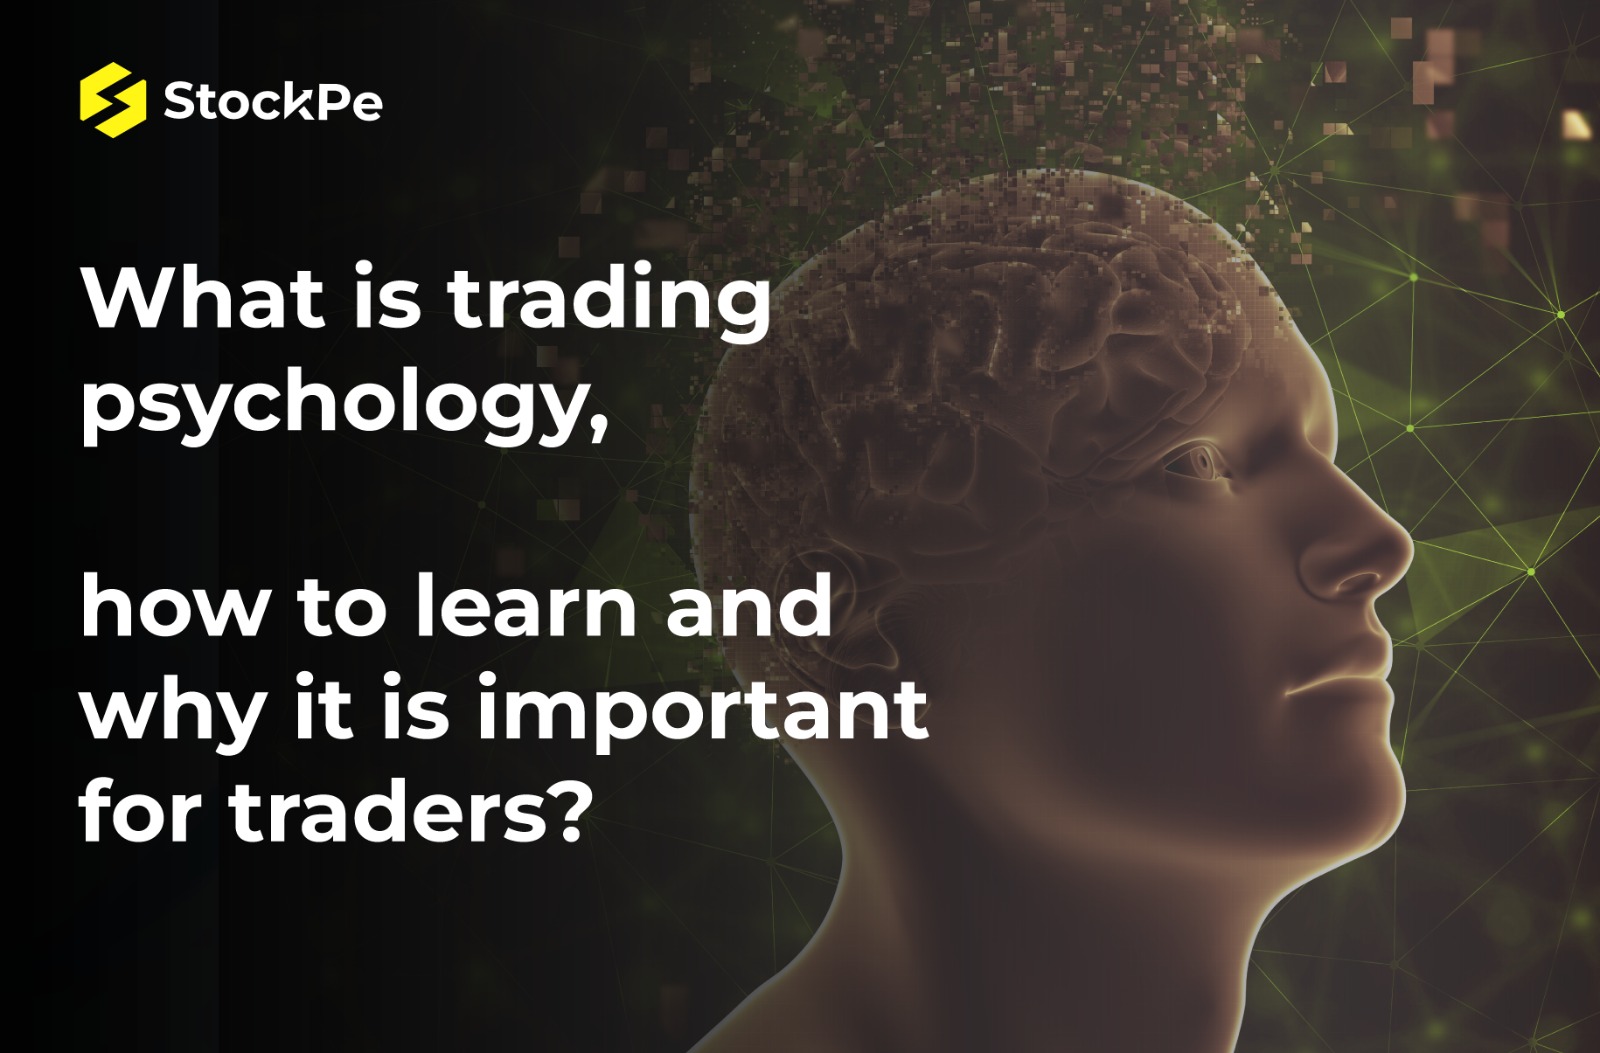 You are currently viewing What is trading psychology? How to learn and why it is important for traders.